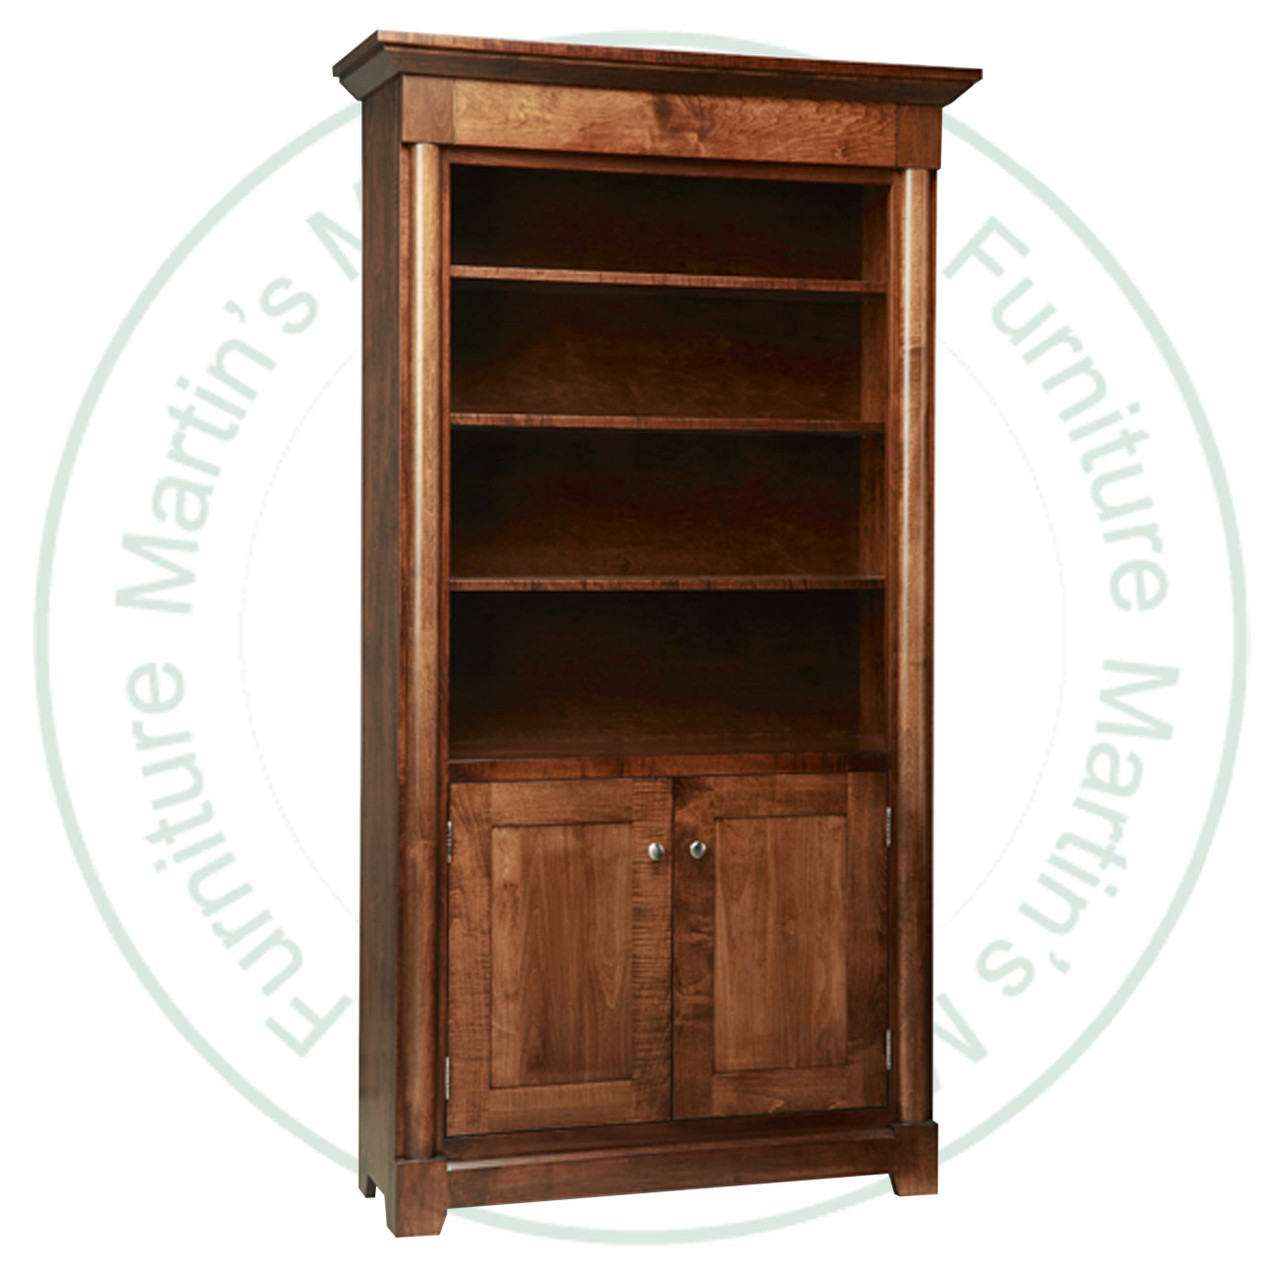 Pine Hudson Valley Bookcase Has 2 Doors And 3 Adjustable Shelves